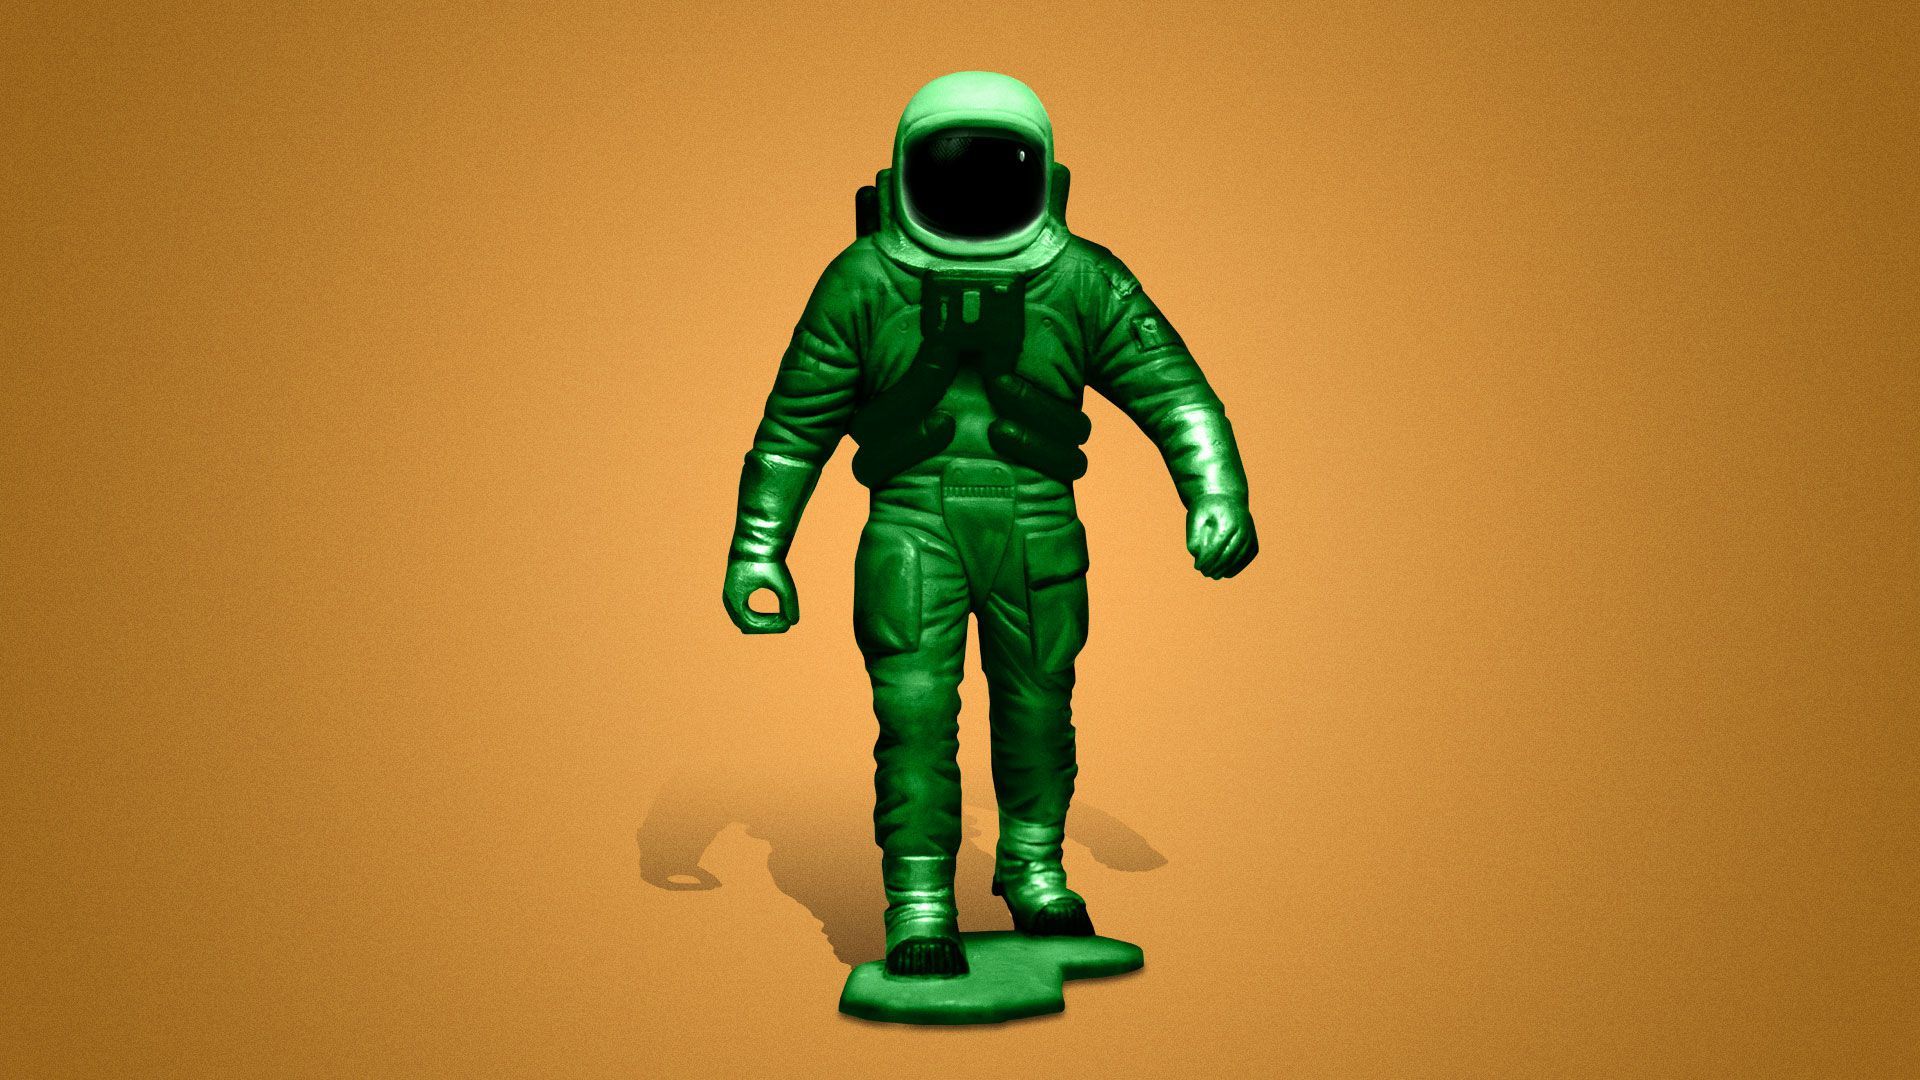 Illustration of an astronaut as a plastic army toy